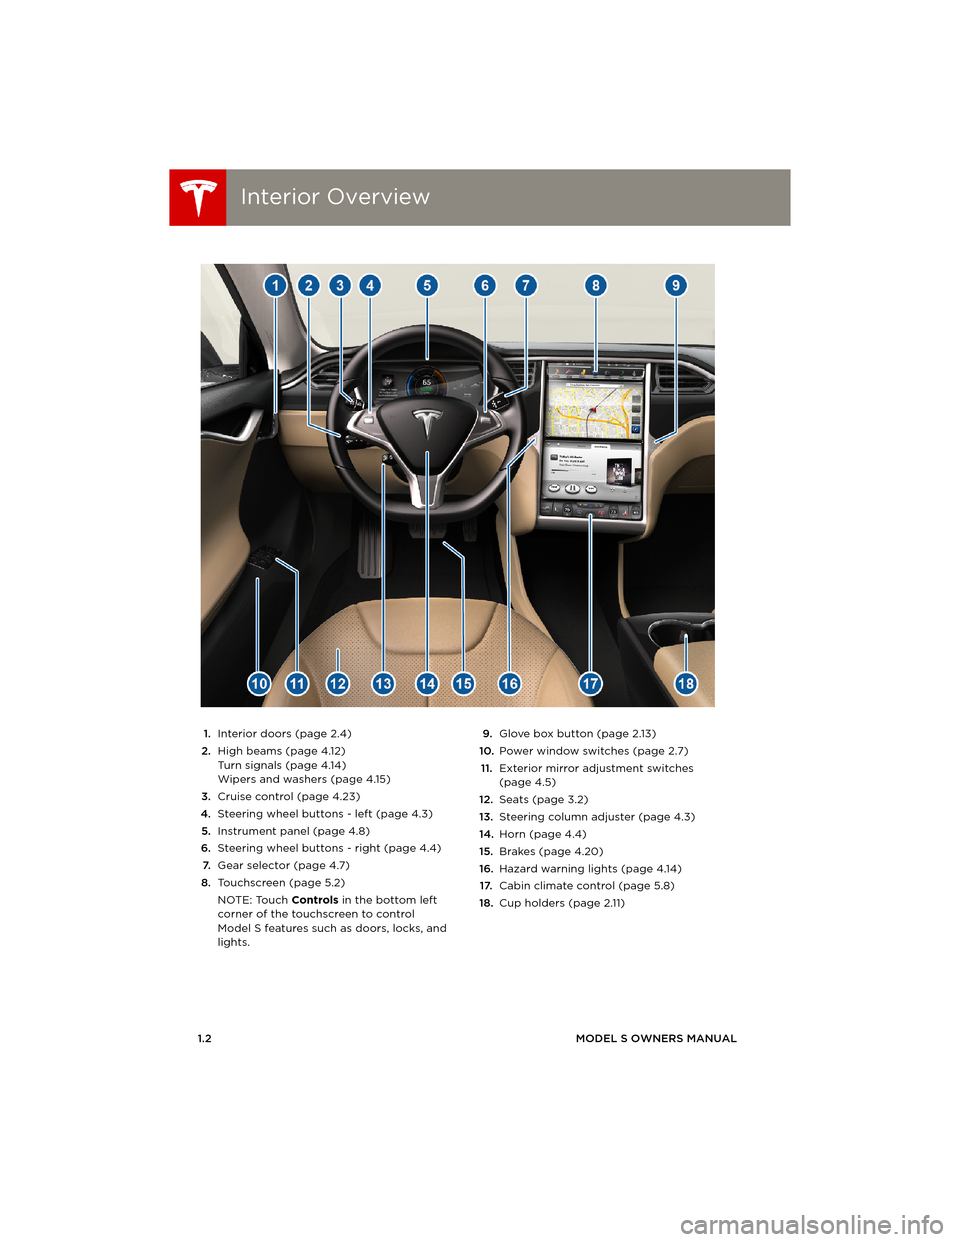 TESLA MODEL S 2014  Owners manual (Europe) Interior OverviewInterior Overview
1.2MODEL S OWNERS MANUAL
OVERVIEW
1.Interior doors (page 2.4)
2.High beams (page 4.12)
Turn signals (page 4.14)
Wipers and washers (page 4.15)
3.Cruise control (page